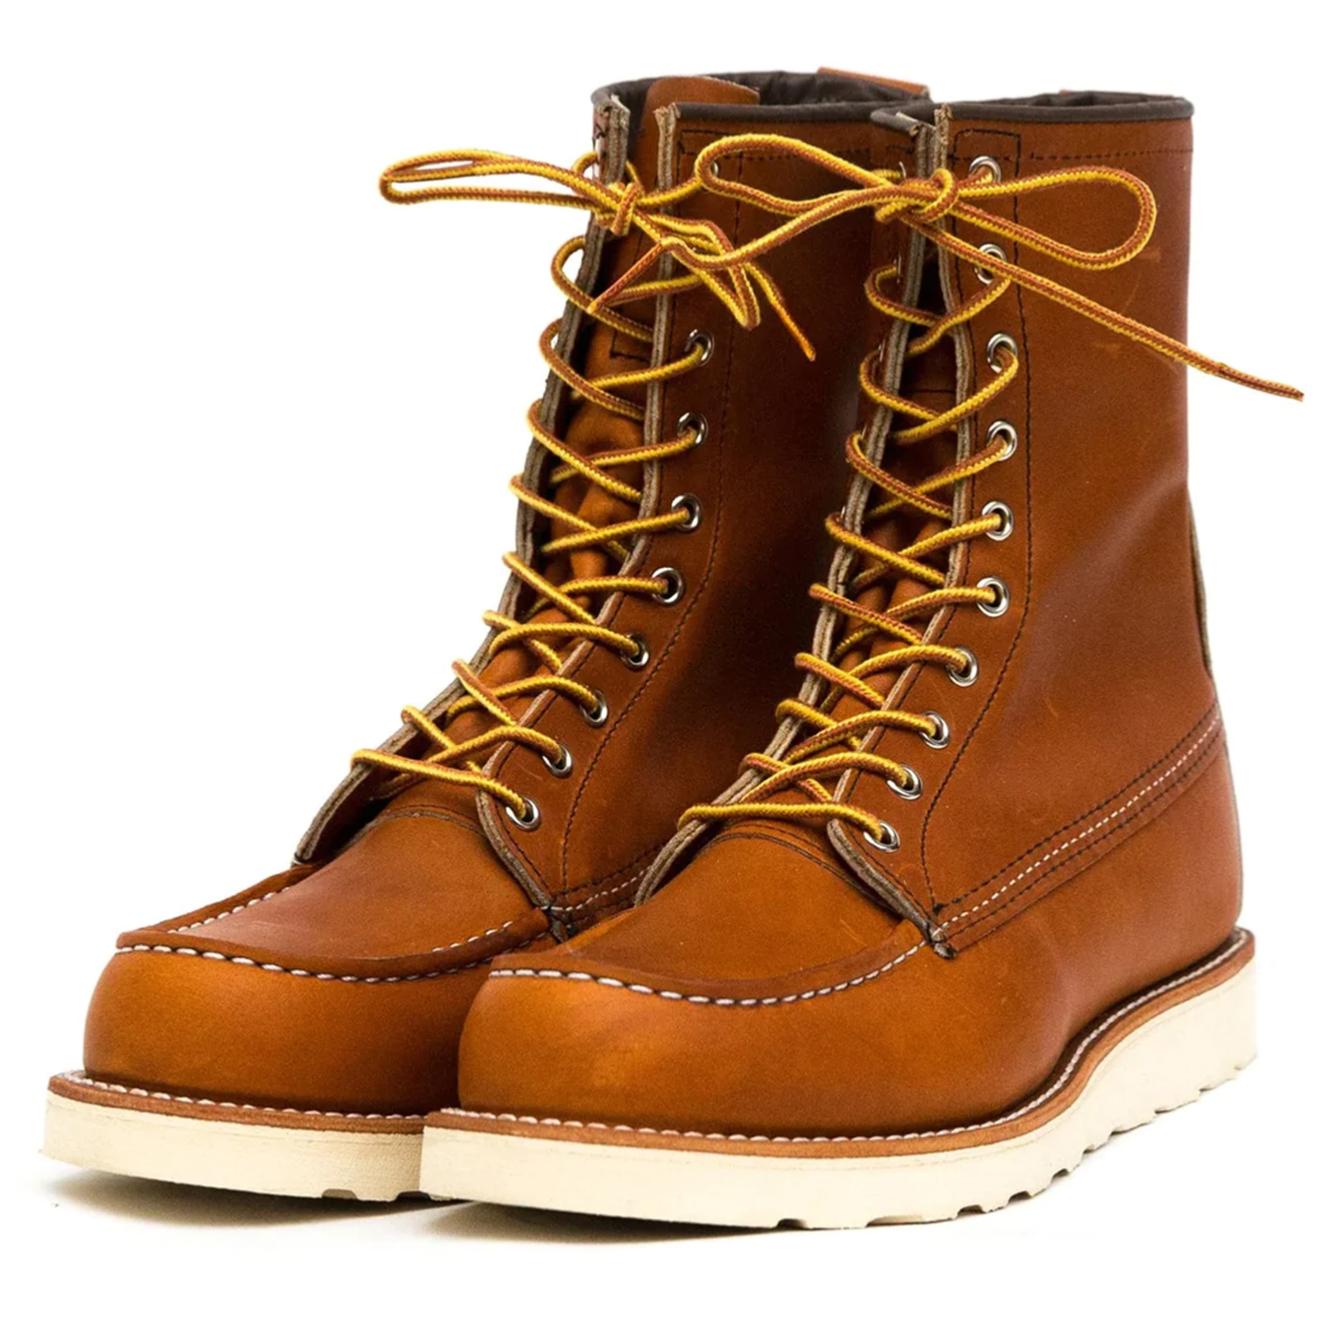 RED WING 877